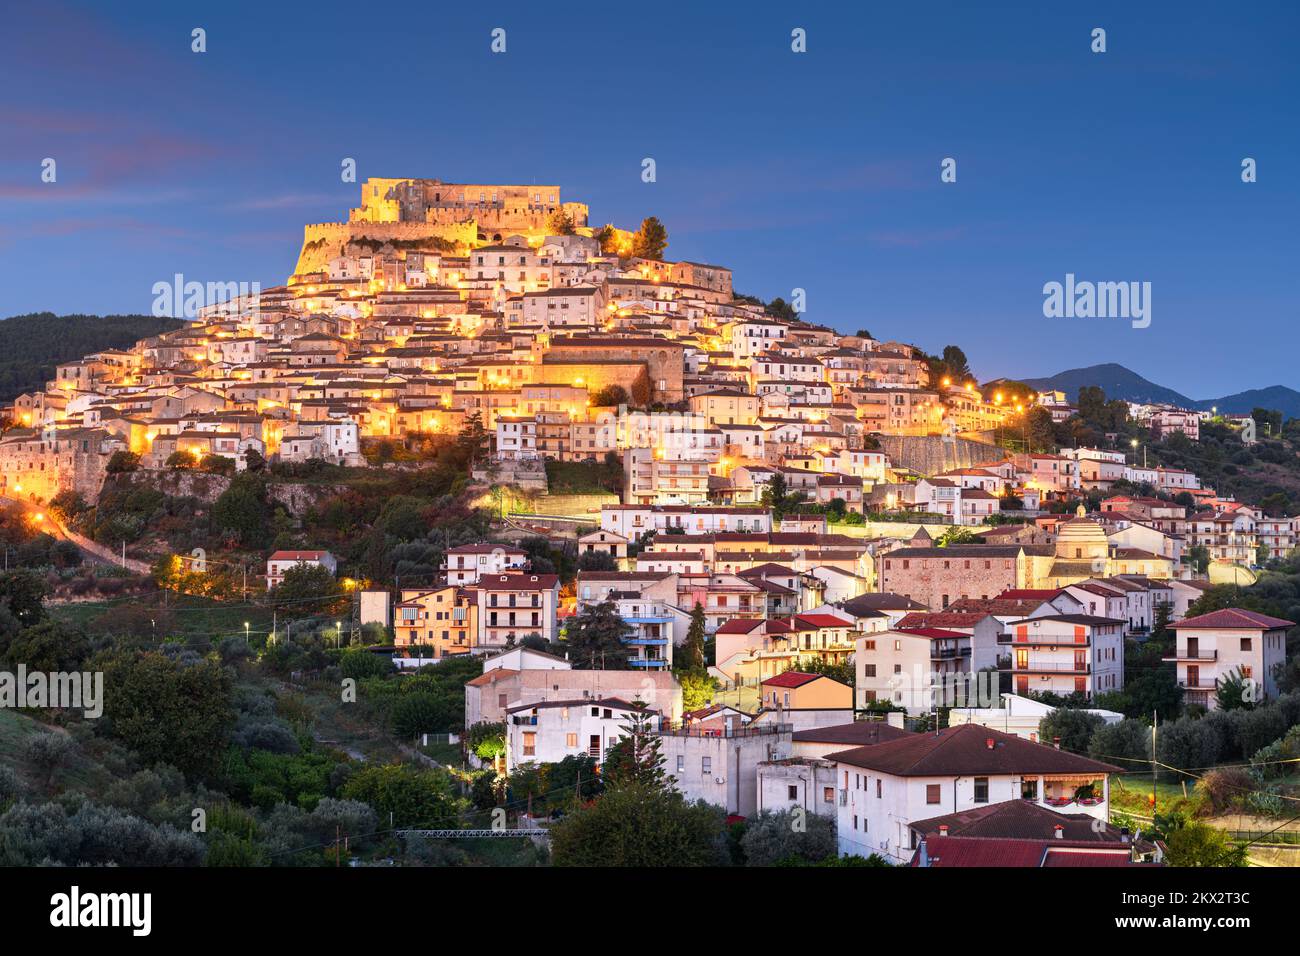 Rocca Imperiale, Italy hilltop town at night in the Calabria Region. Stock Photo